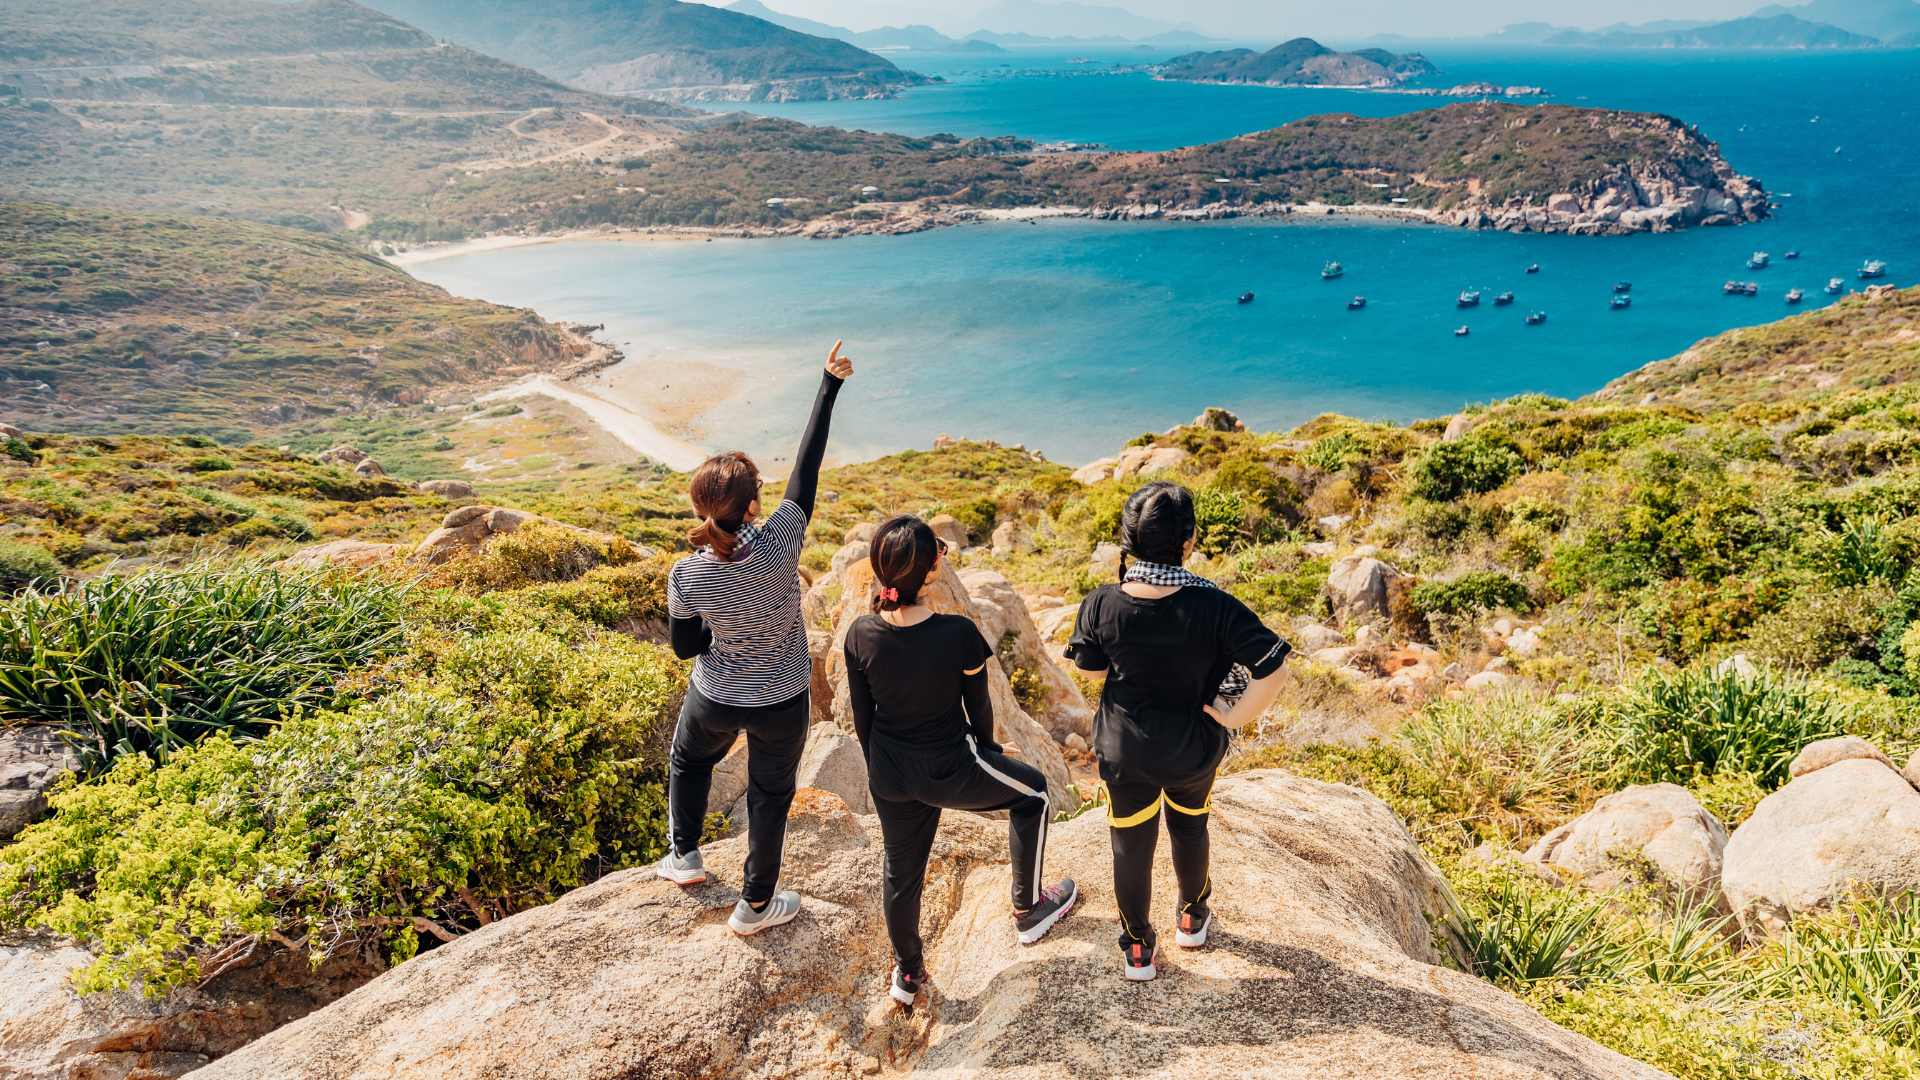 three young women celebrate reaching the top of a mountain, overlooking a beautiful coastline on a sunny day